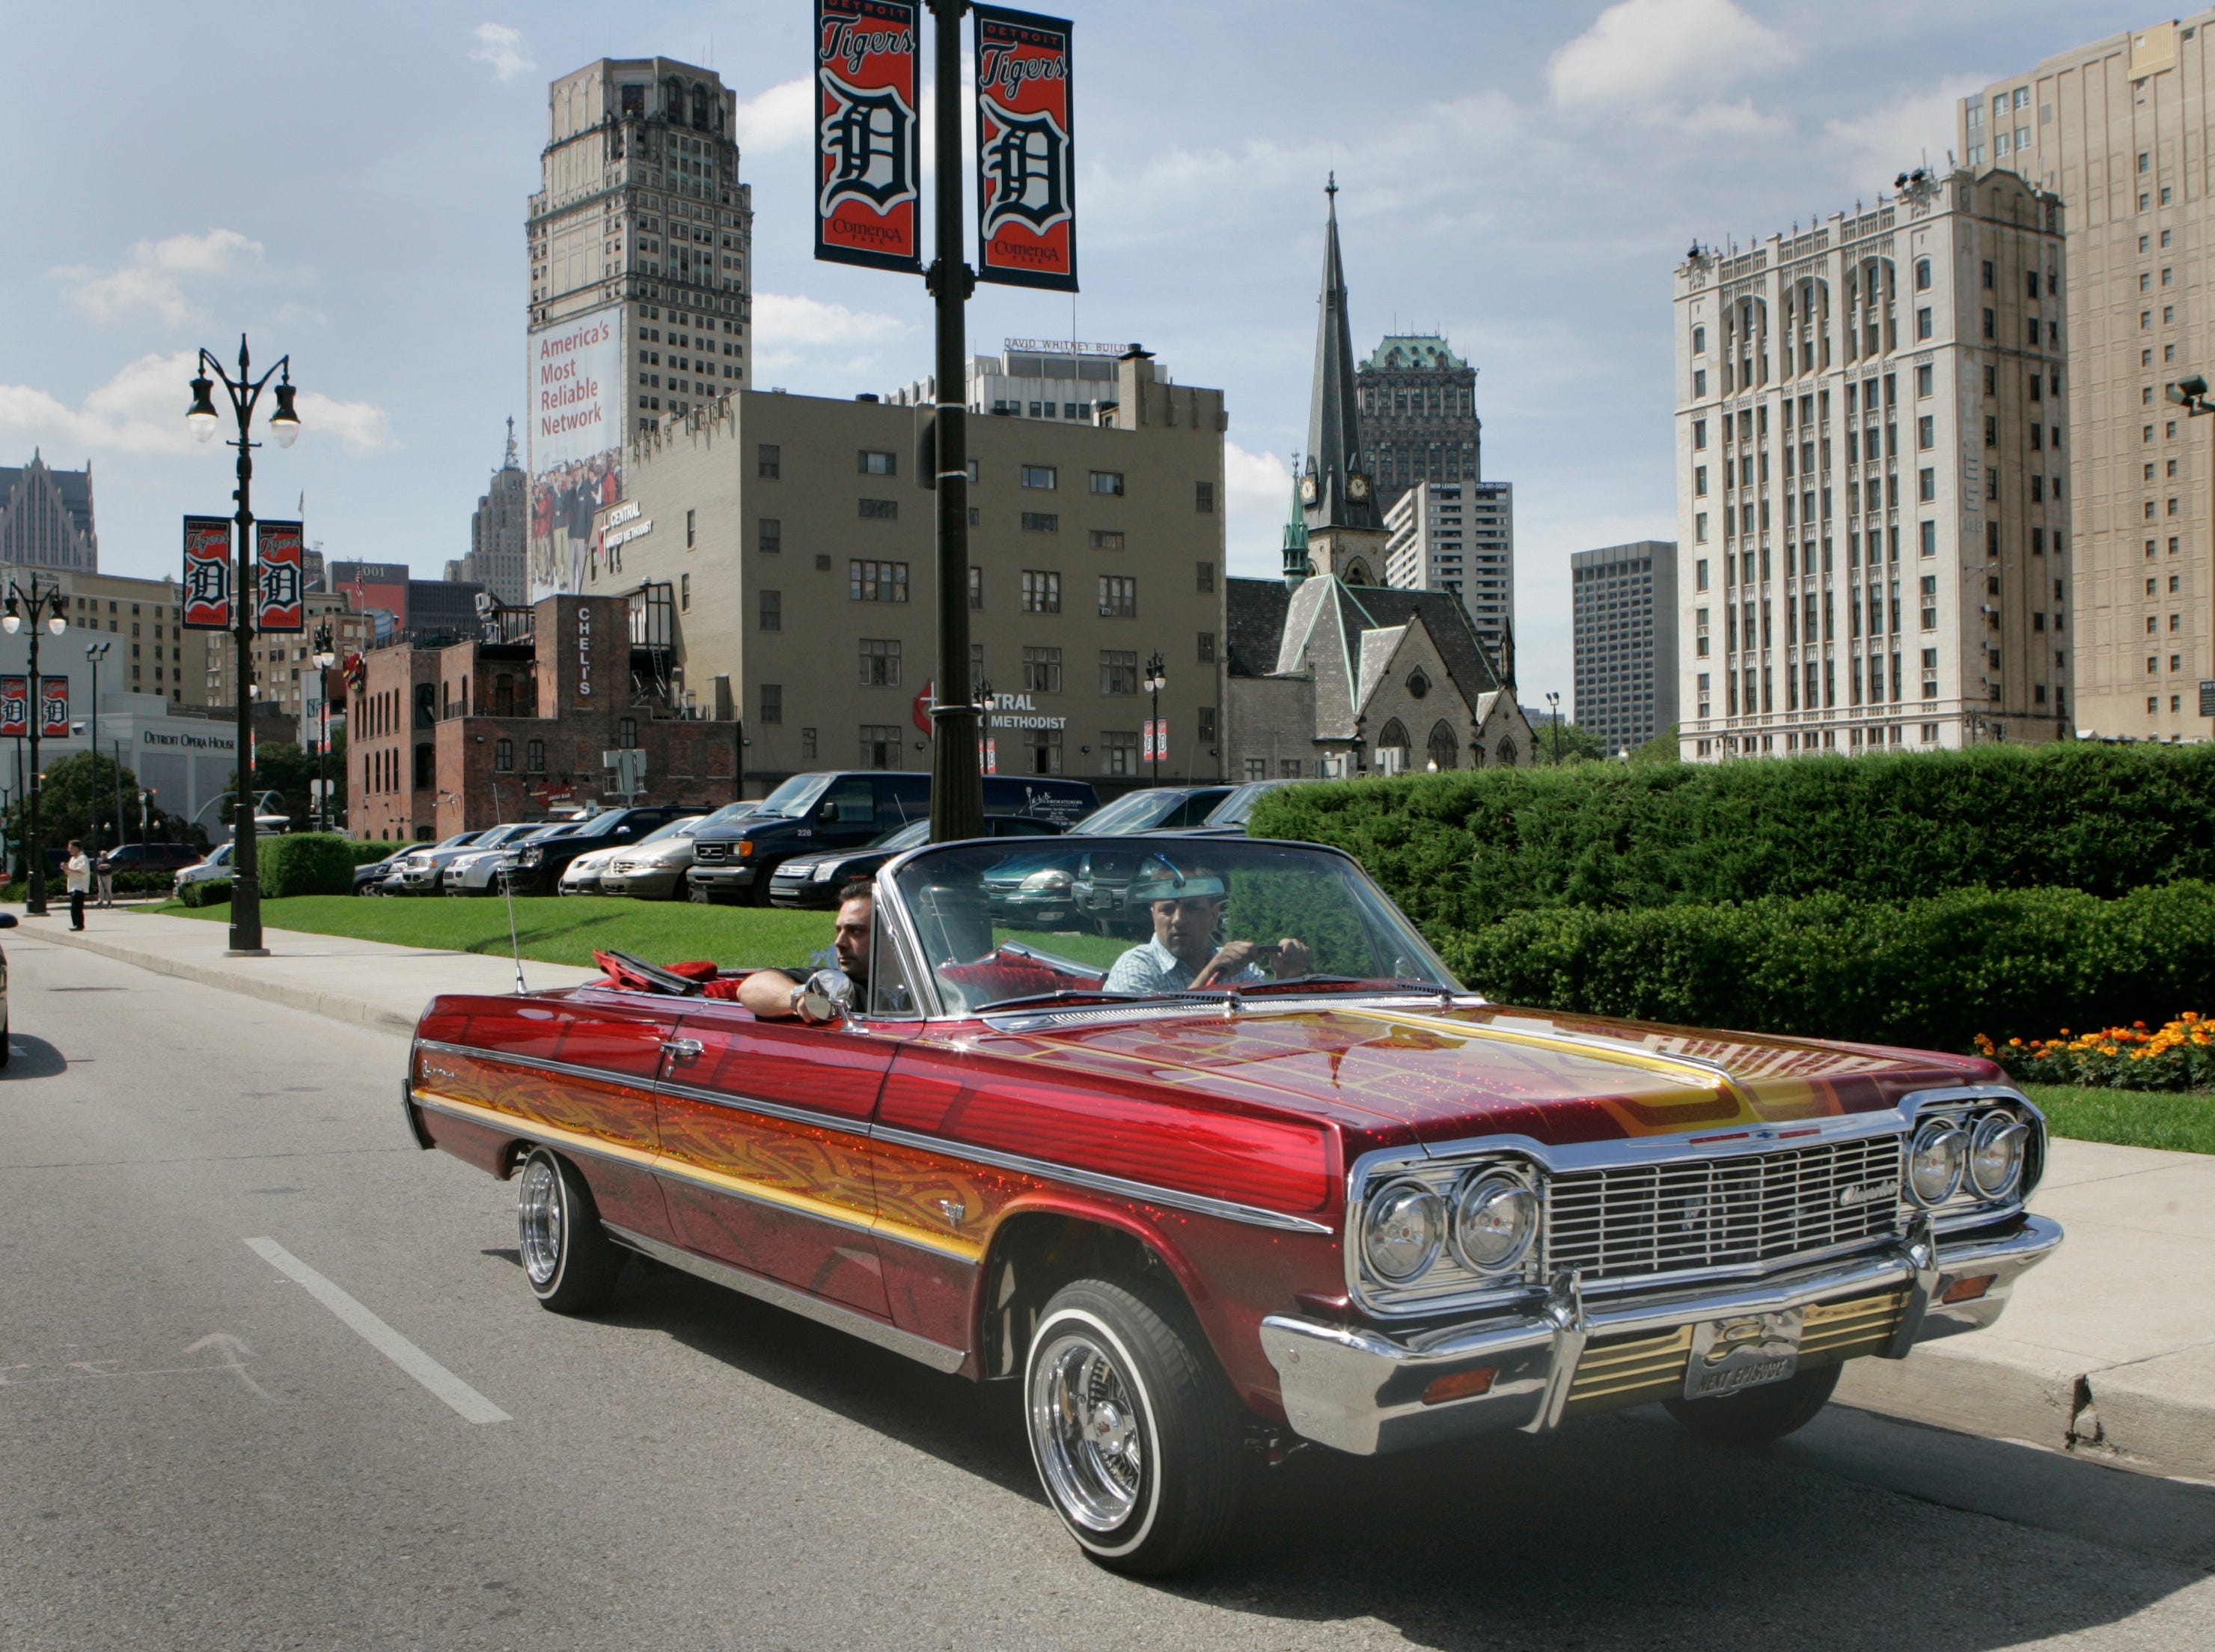 A 1964 Chevy Impala owned by Thomas Cavataio drives down Woodward in Detroit, June 24, 2008.